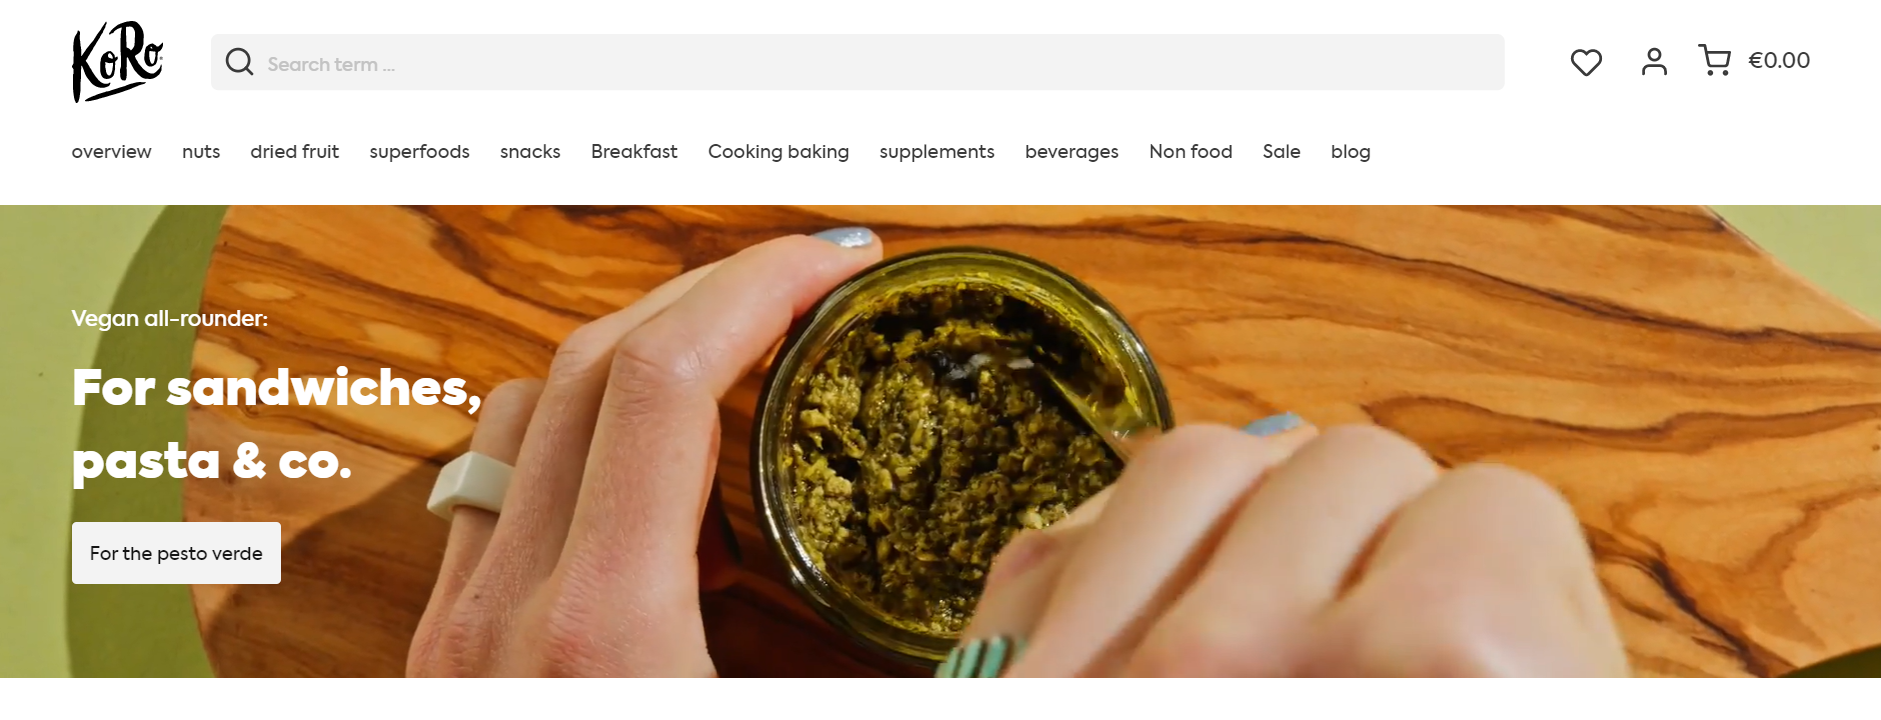 KoRo Raises $20 Million in Series B Funding Round to Provide High-Quality Food